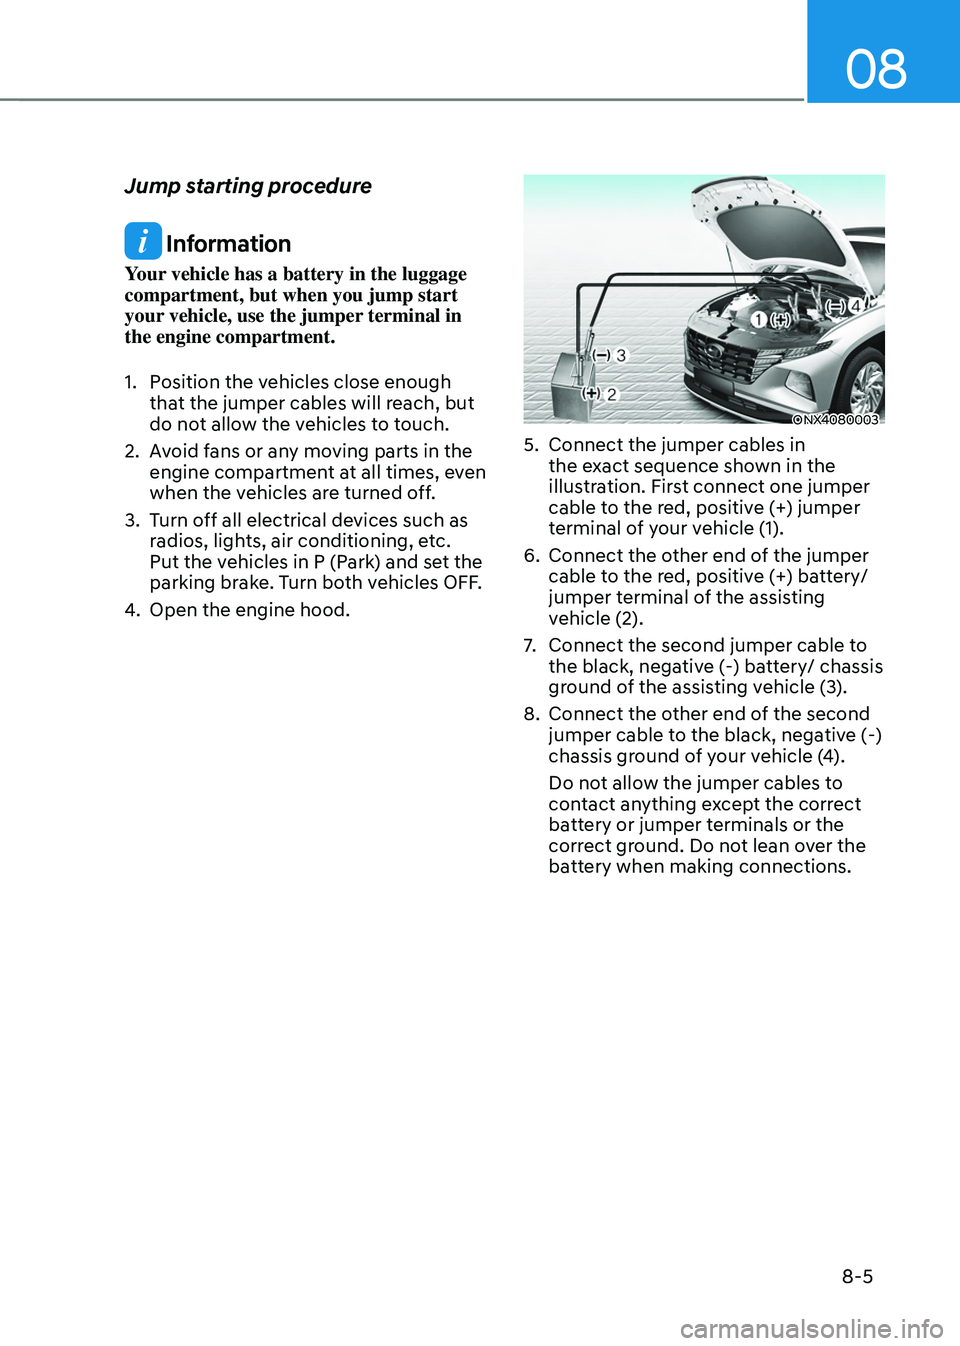 HYUNDAI TUCSON 2022  Owners Manual 08
8-5
Jump starting procedure
 Information
Your vehicle has a battery in the luggage 
compartment, but when you jump start 
your vehicle, use the jumper terminal in 
the engine compartment.
1. Positi